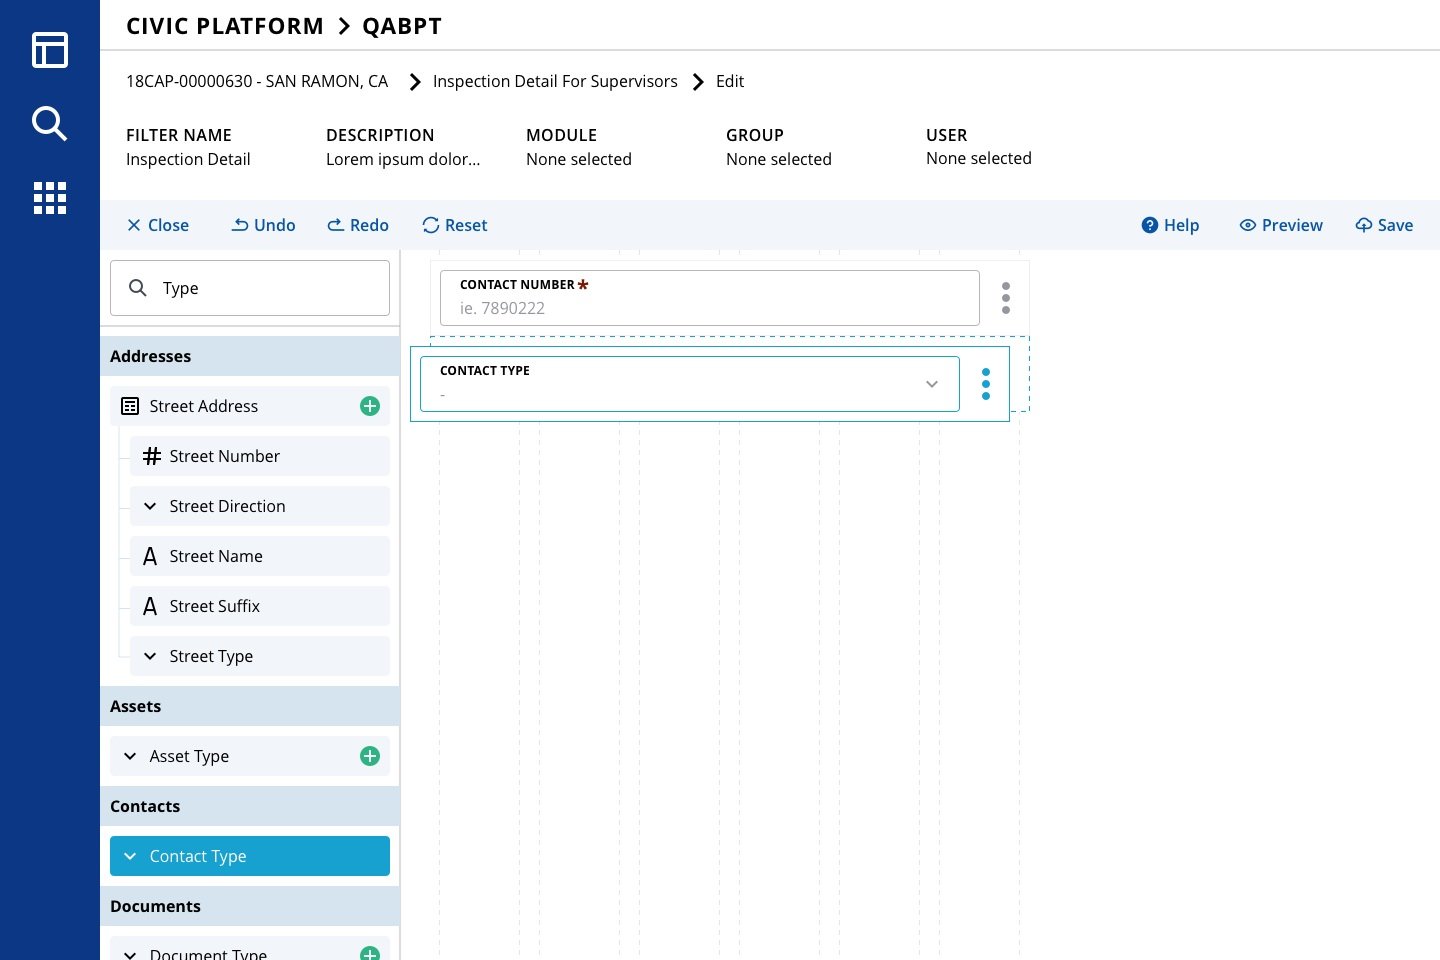  Form Builder interface, showing drag and drop functionality to bring a new component onto the form. 